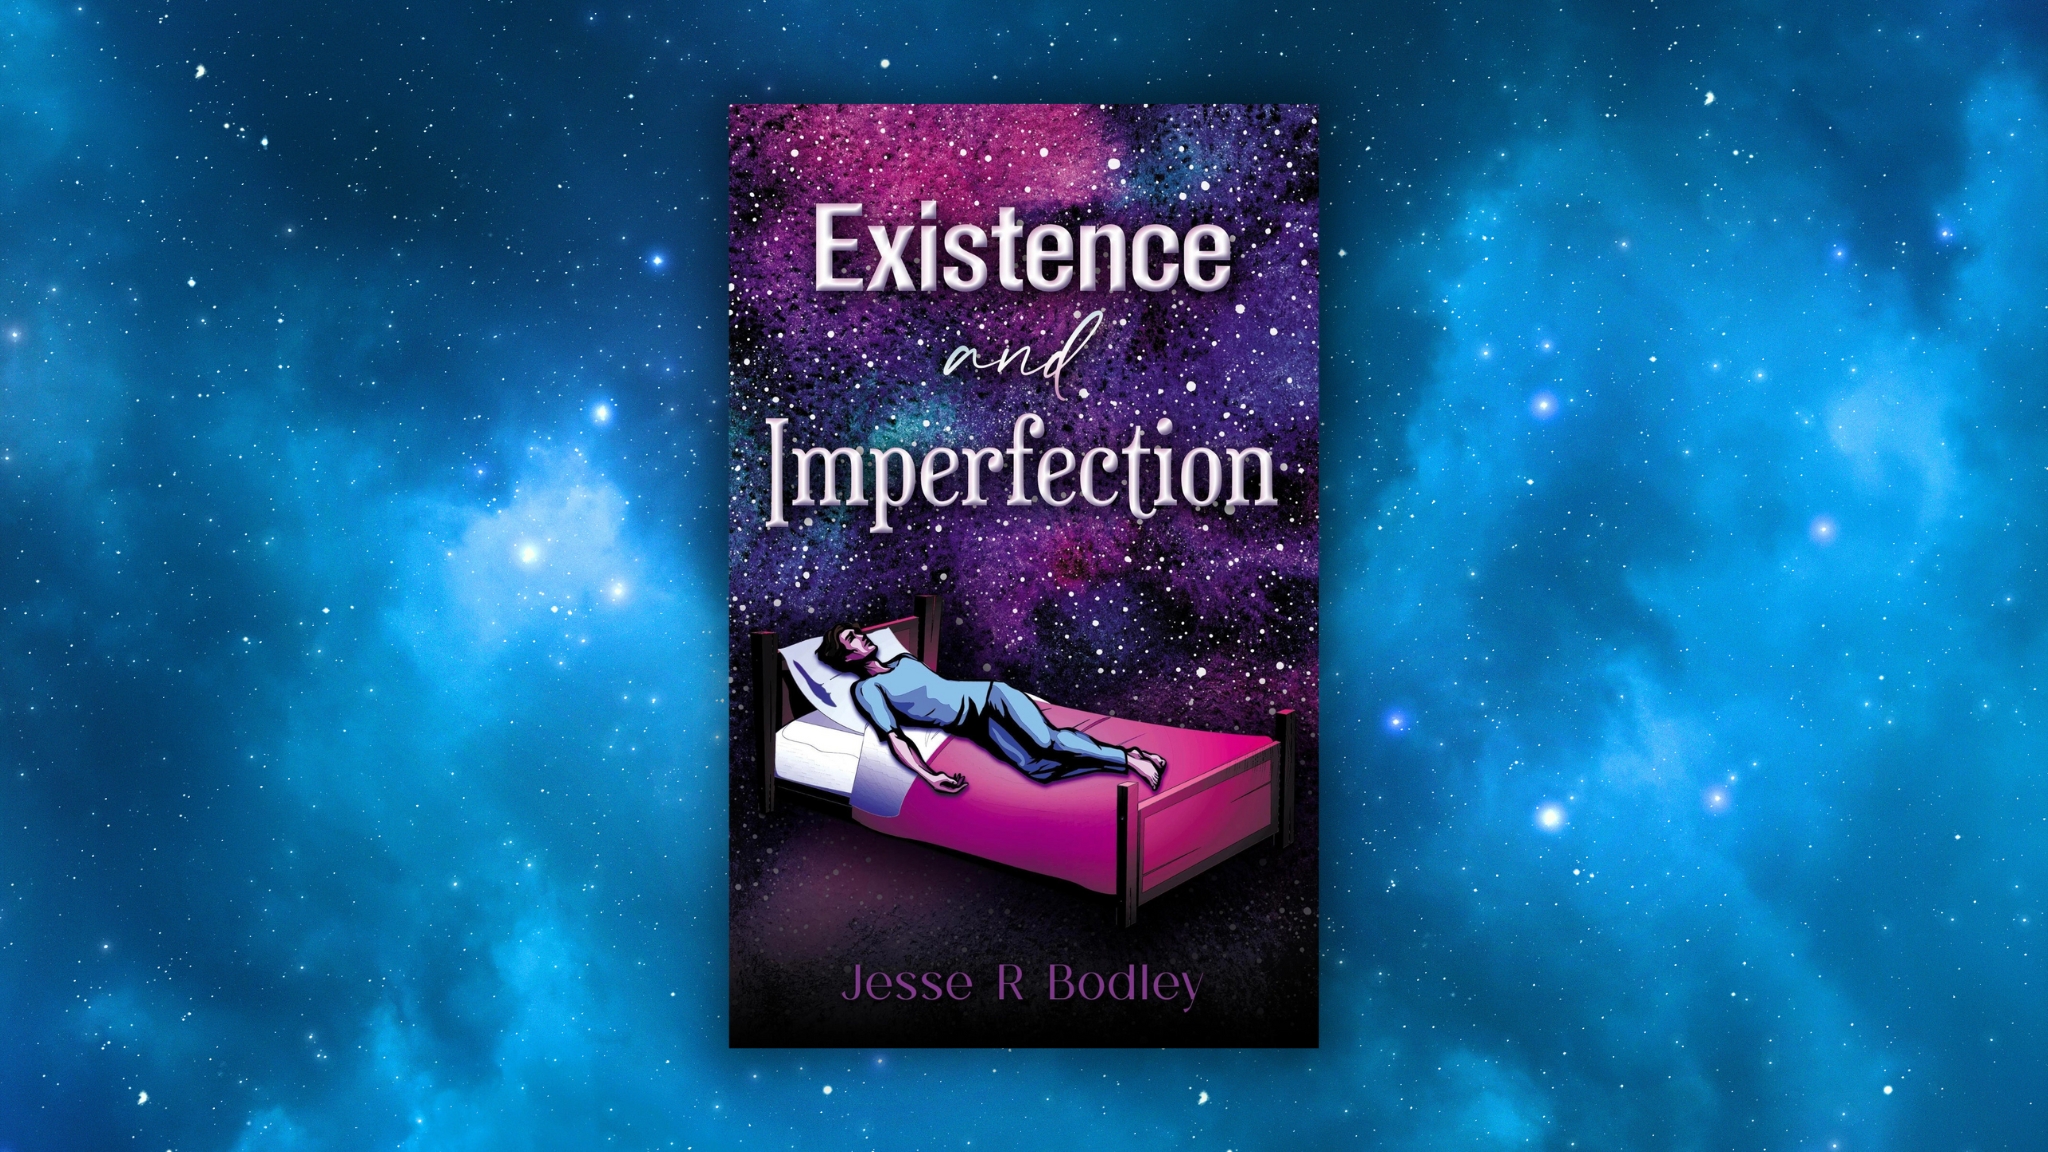 Existence and Imperfection by Jesse R. Bodley